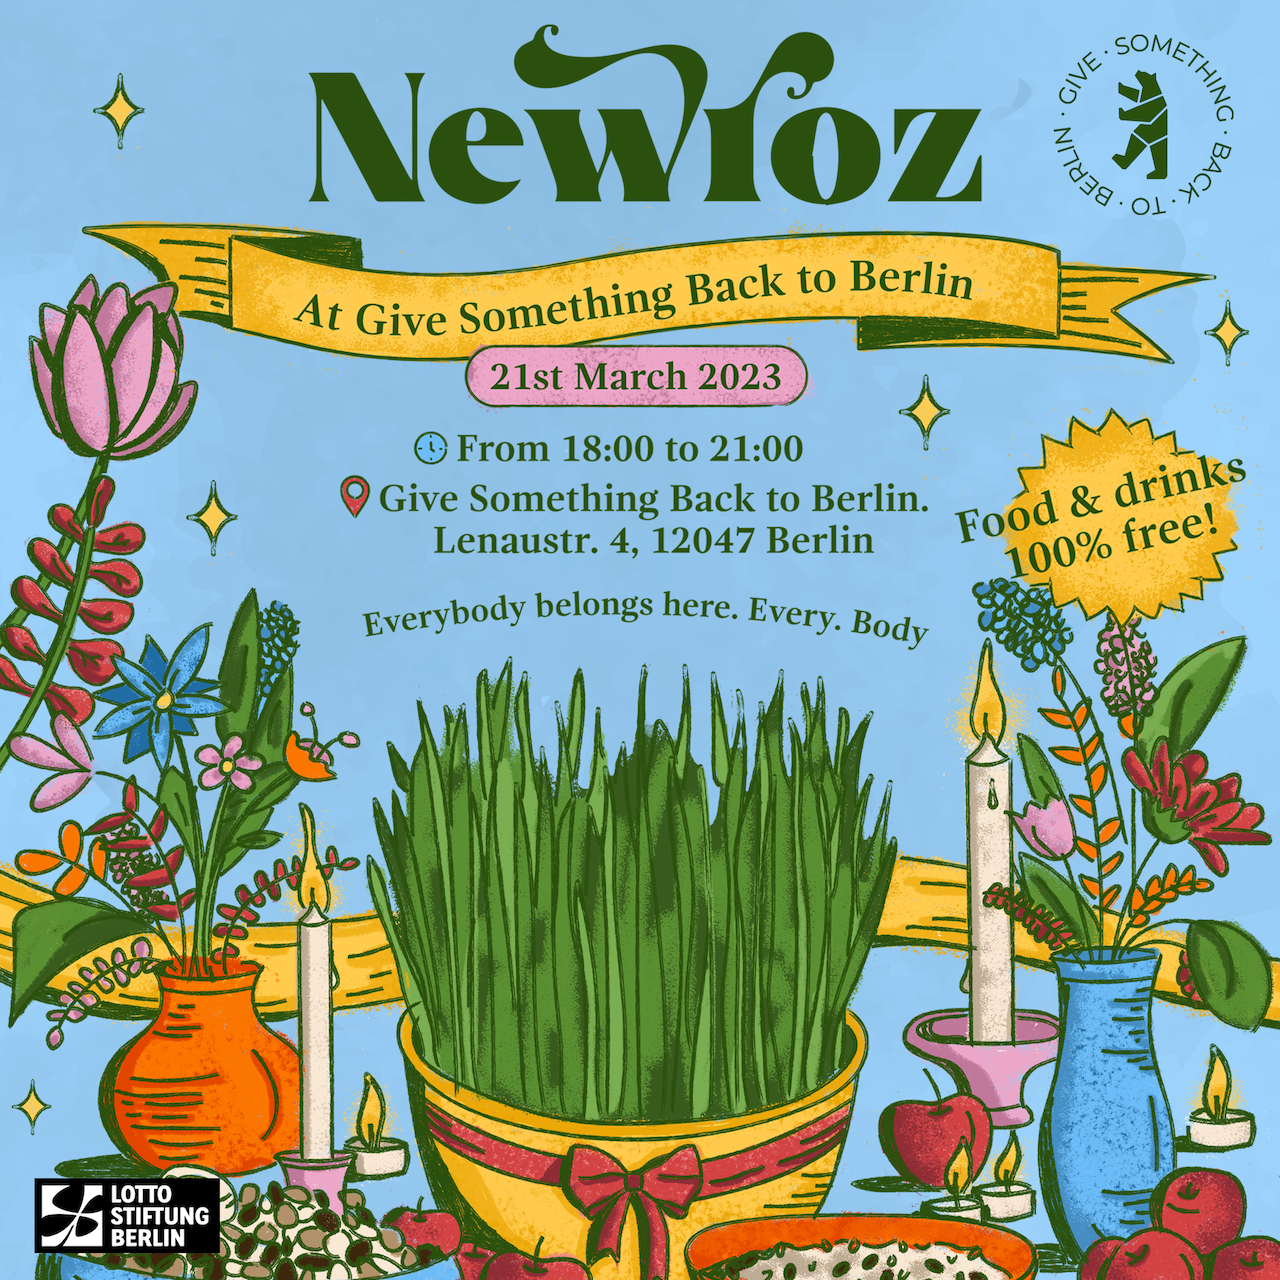 FIELD TRIP! Give Something Back to Berlin: Newroz Community Gathering